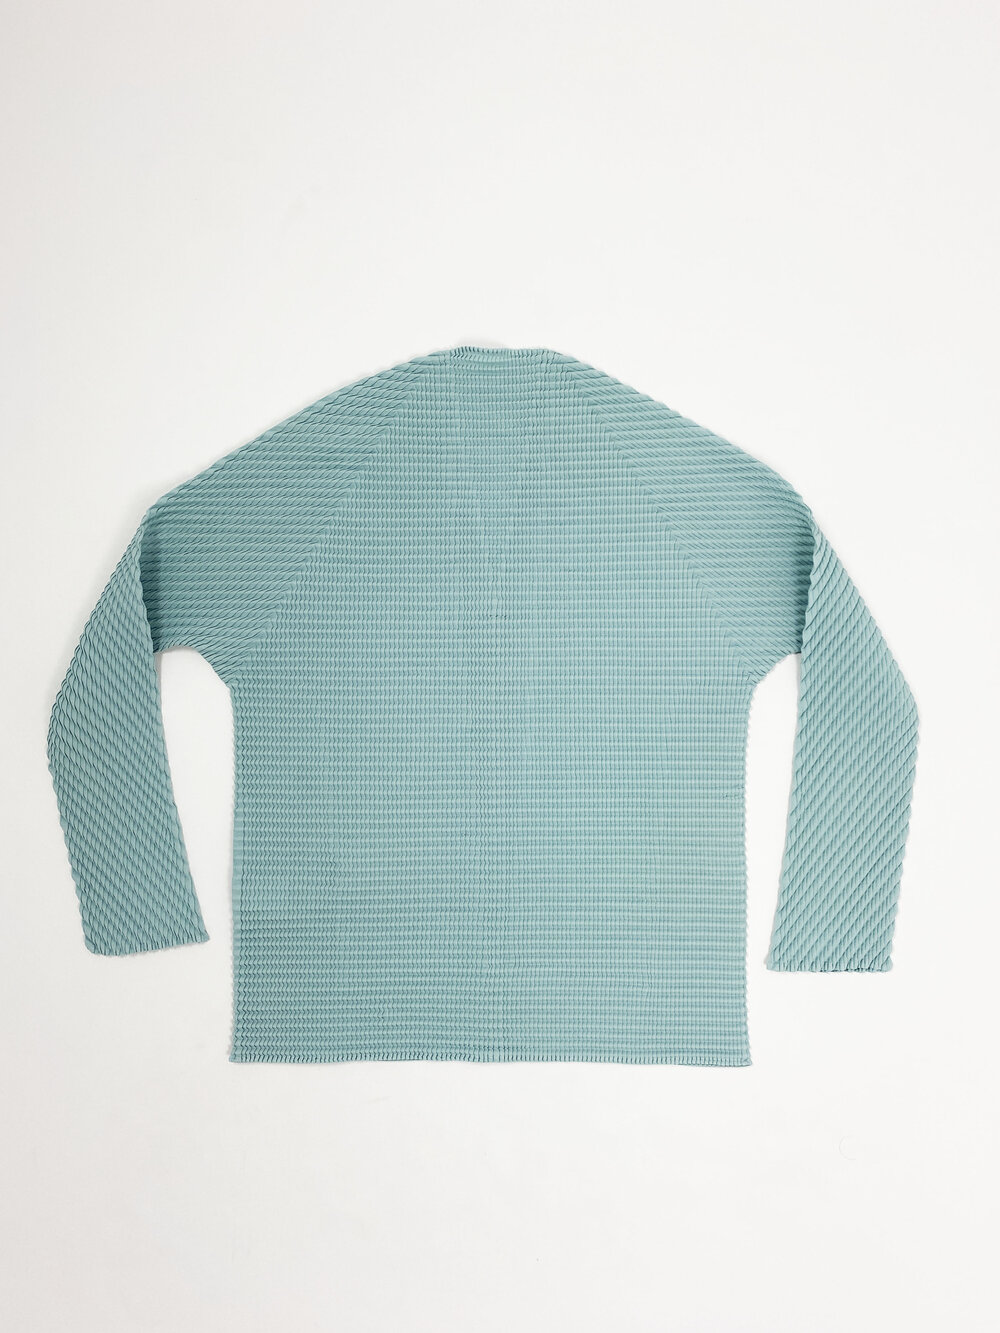 Issey Miyake mint green pleated top — JAMES VELORIA